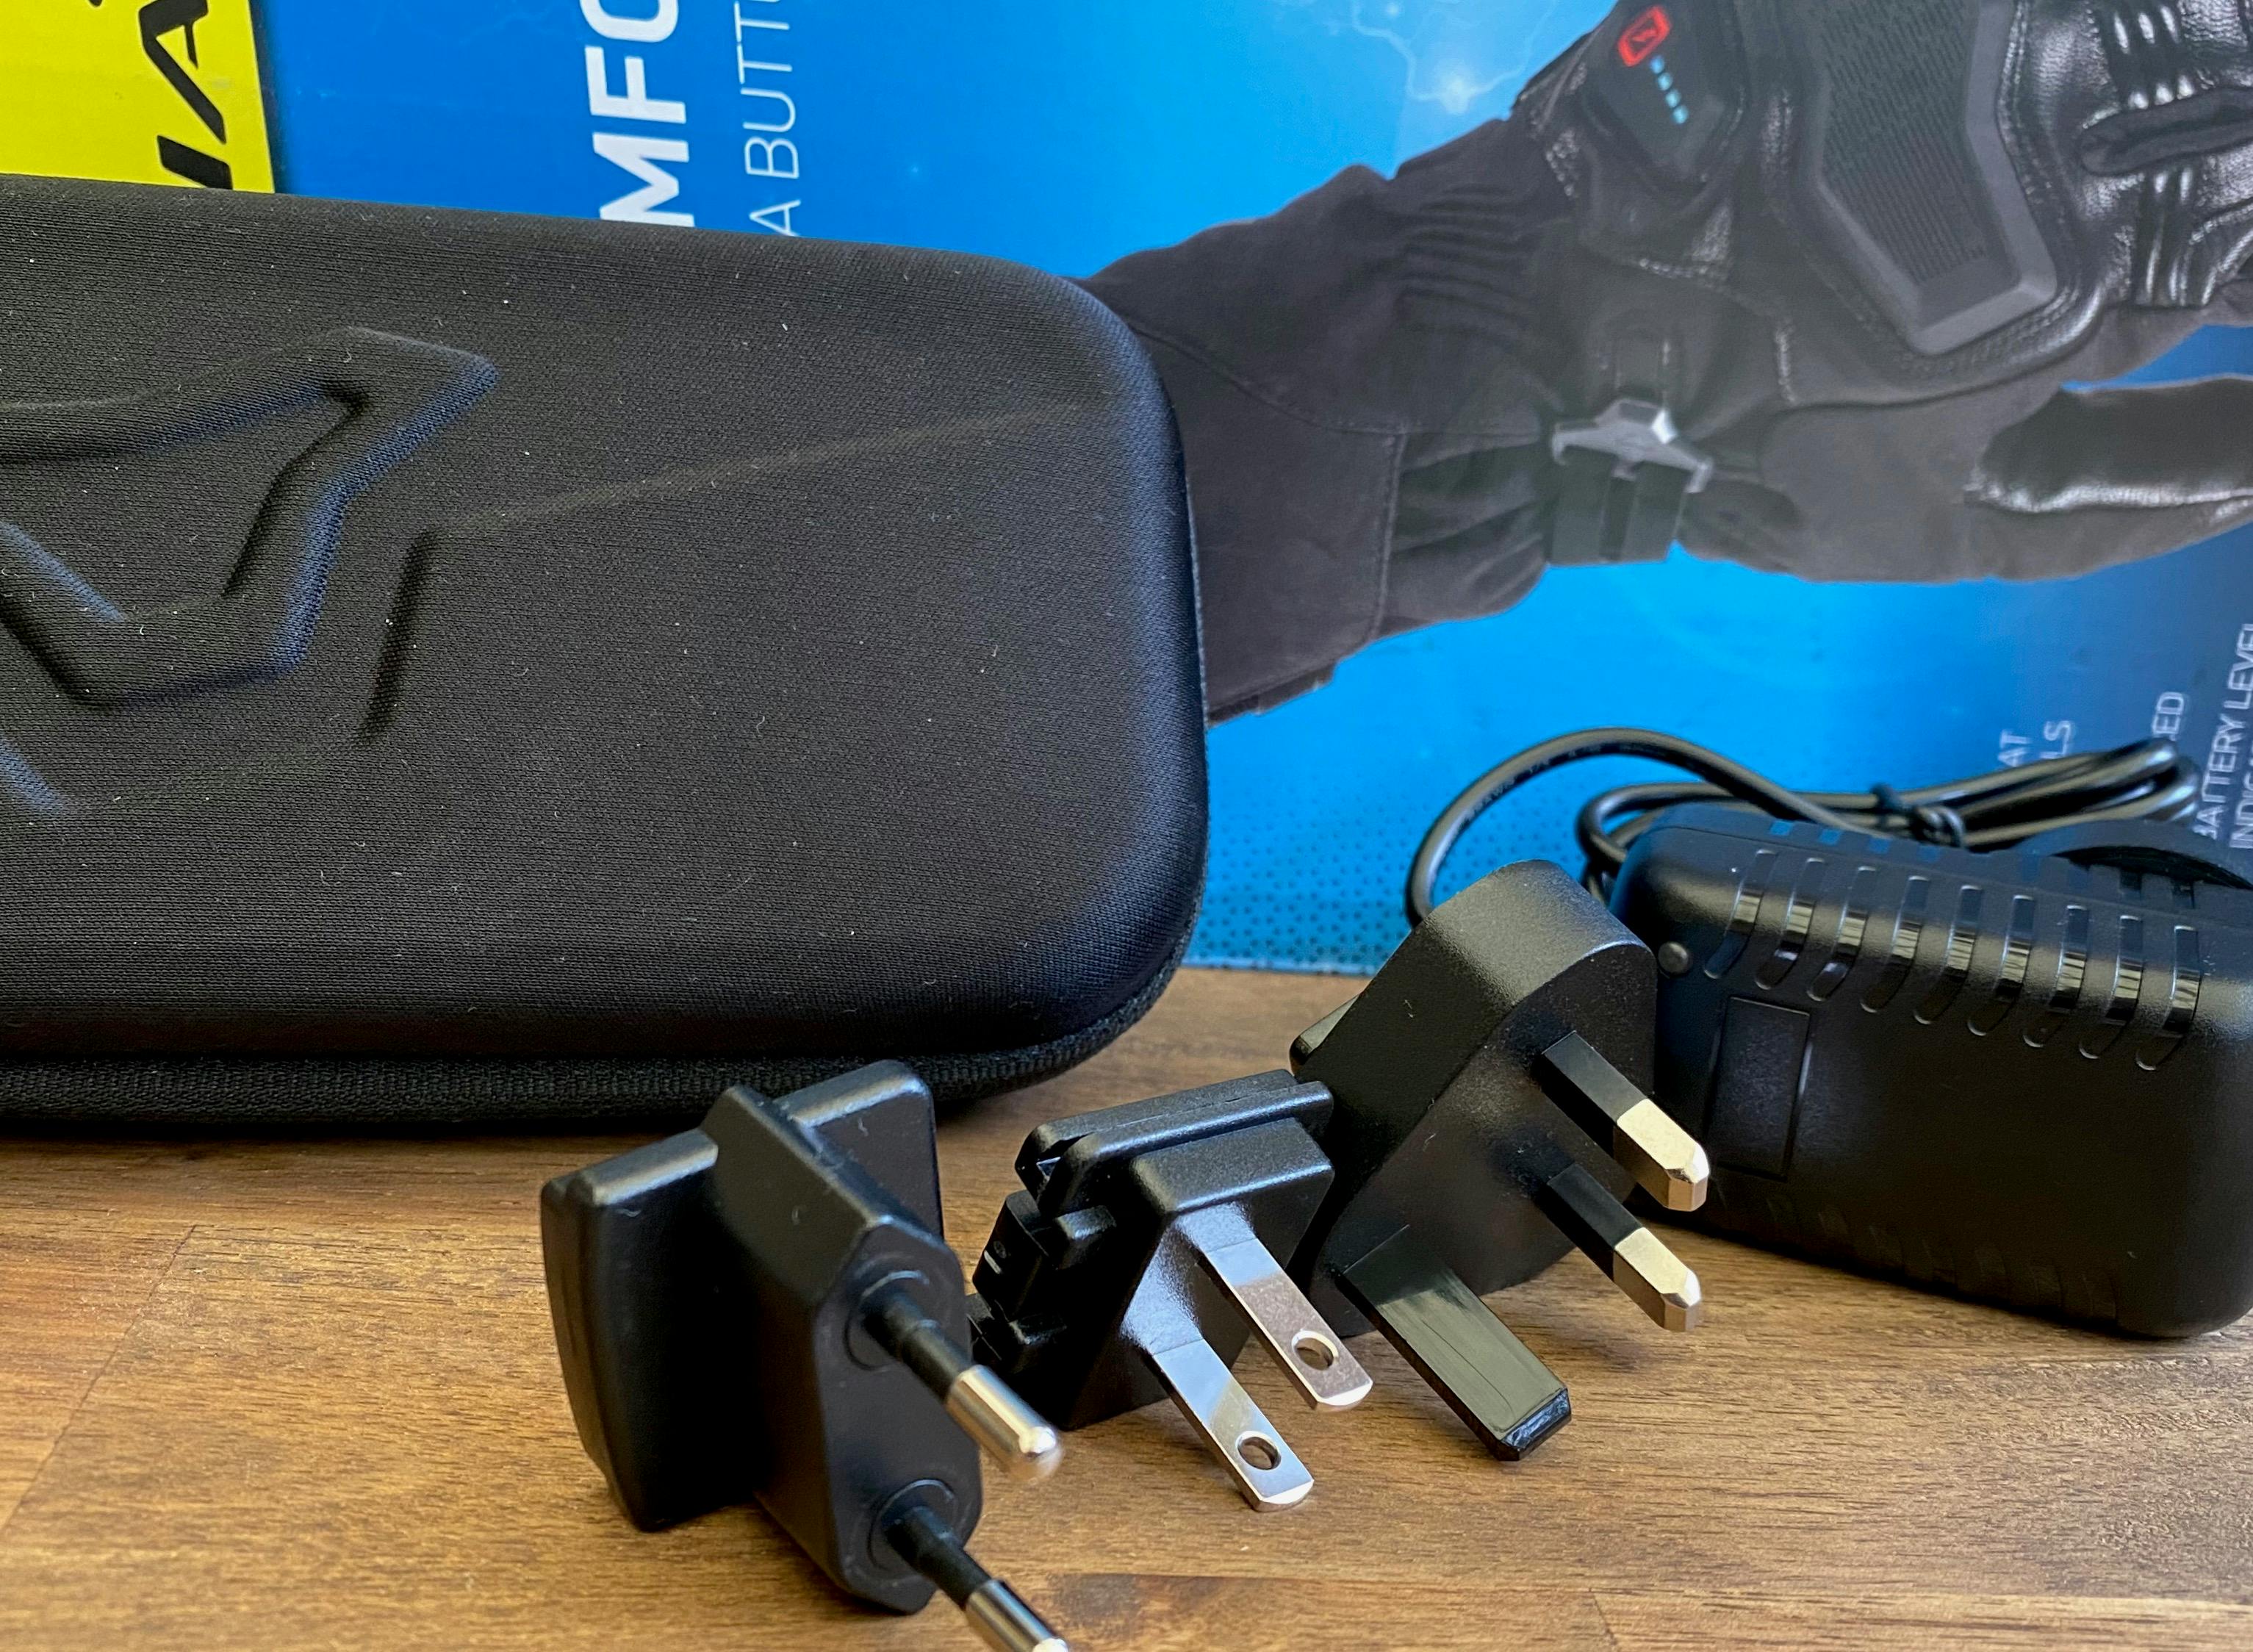 The wall charger with carry case and power adaptors that come with the Macna Ion glove